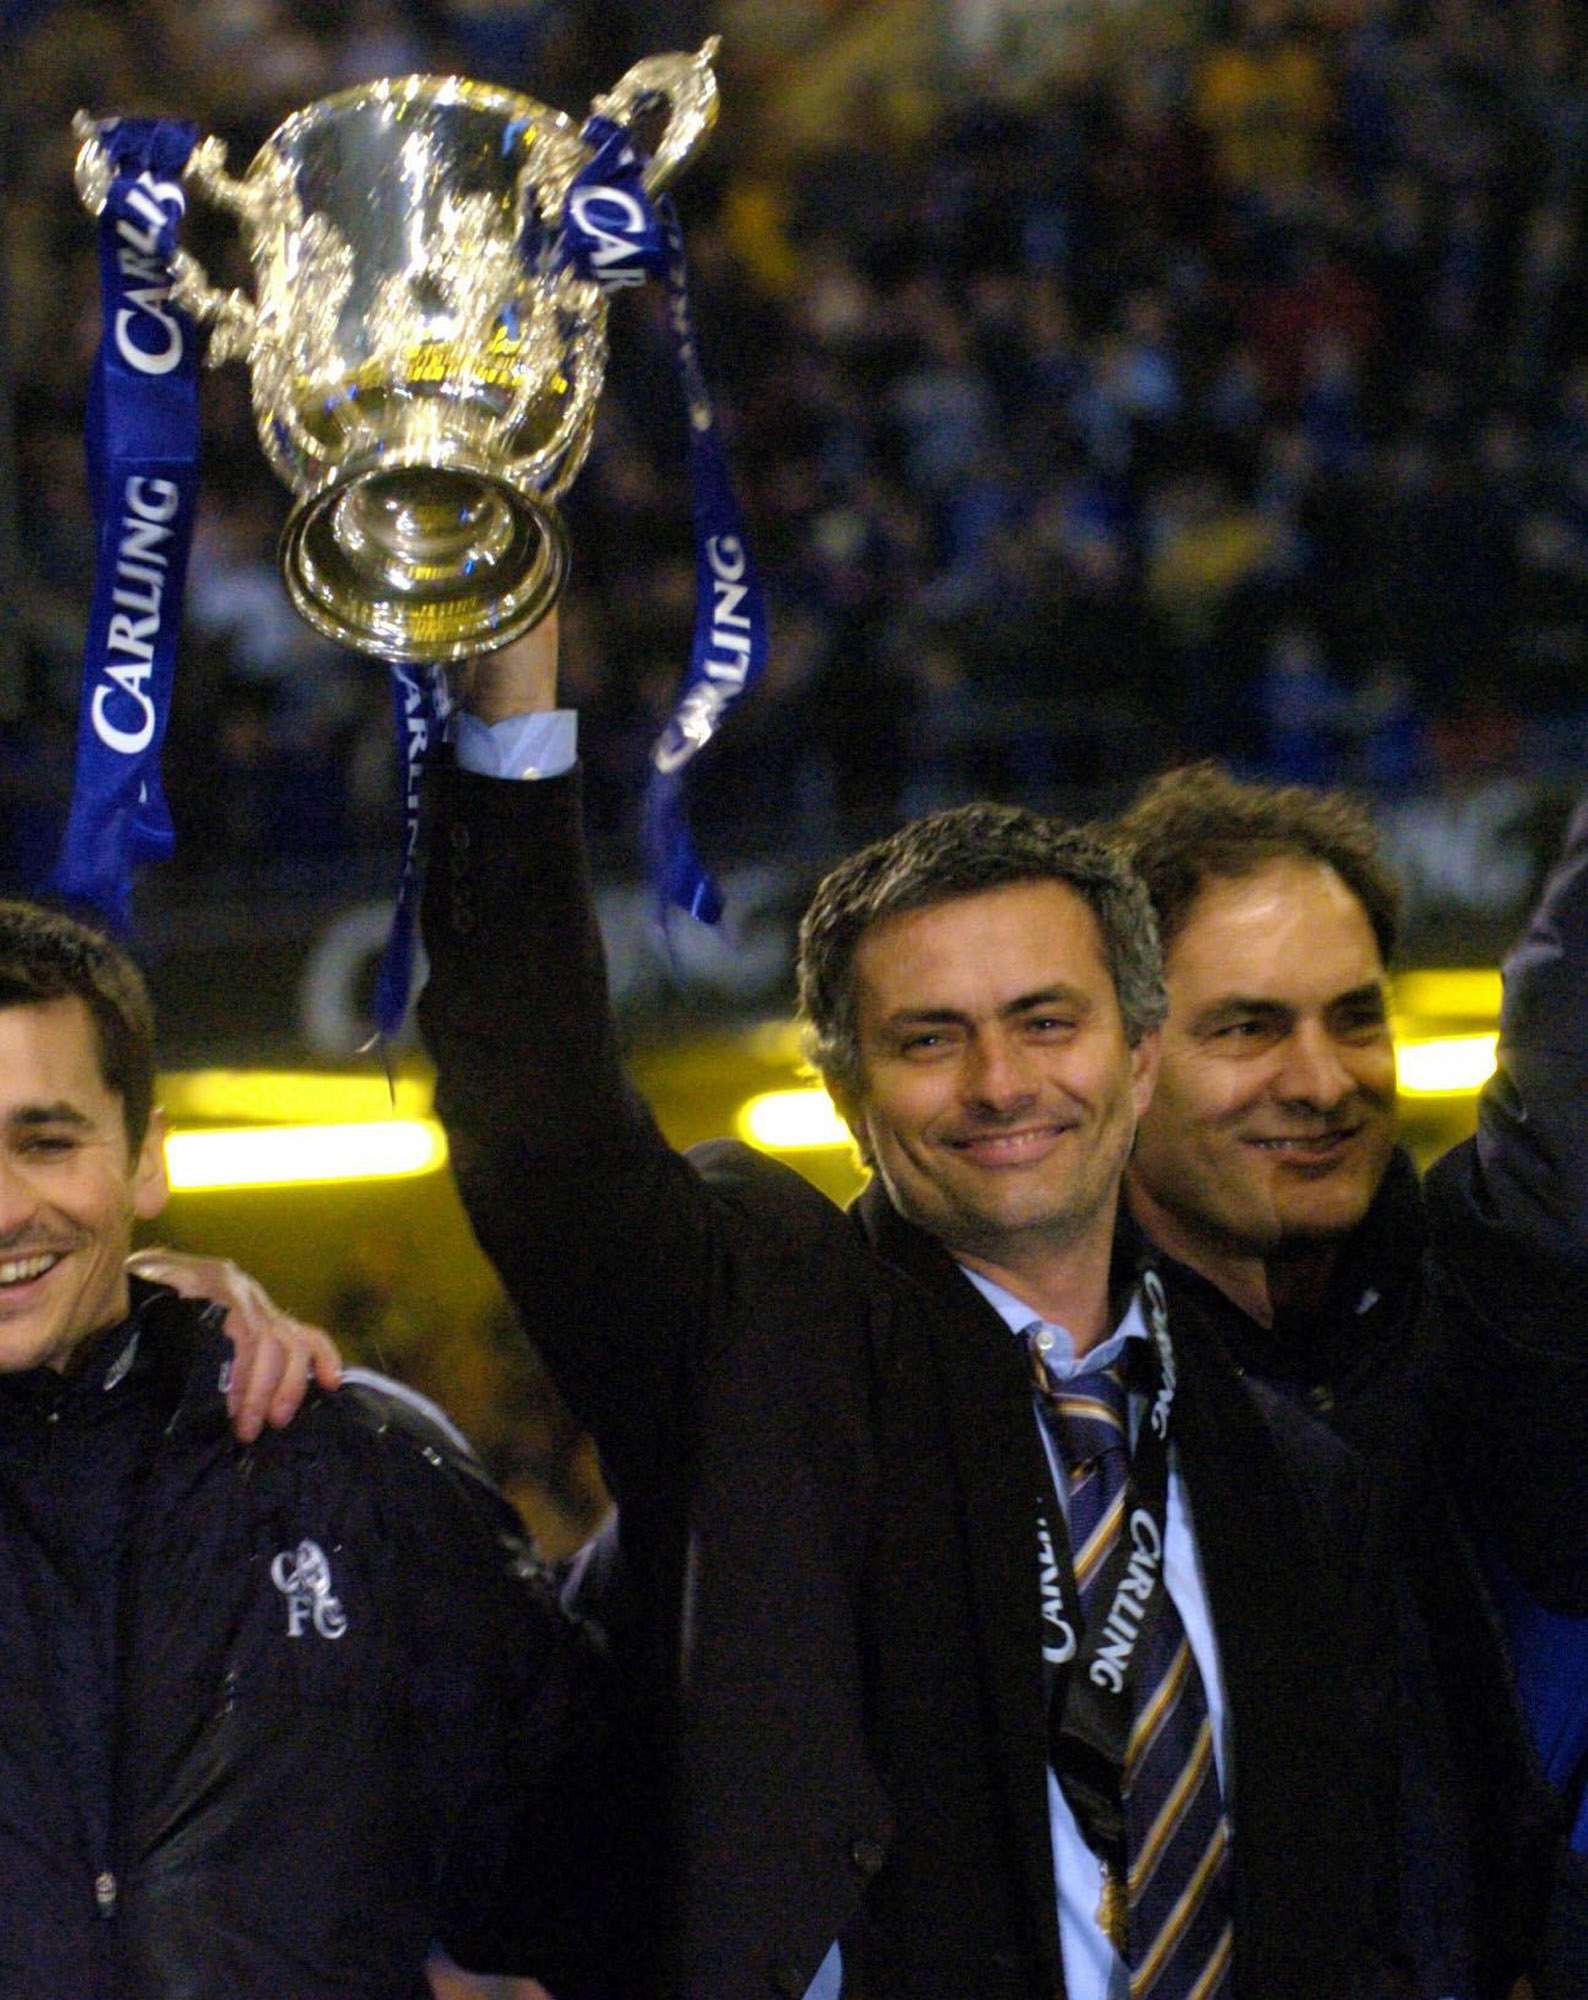 The 2005 League Cup was Jose Mourinho’s first trophy with Chelsea. Photo: AP